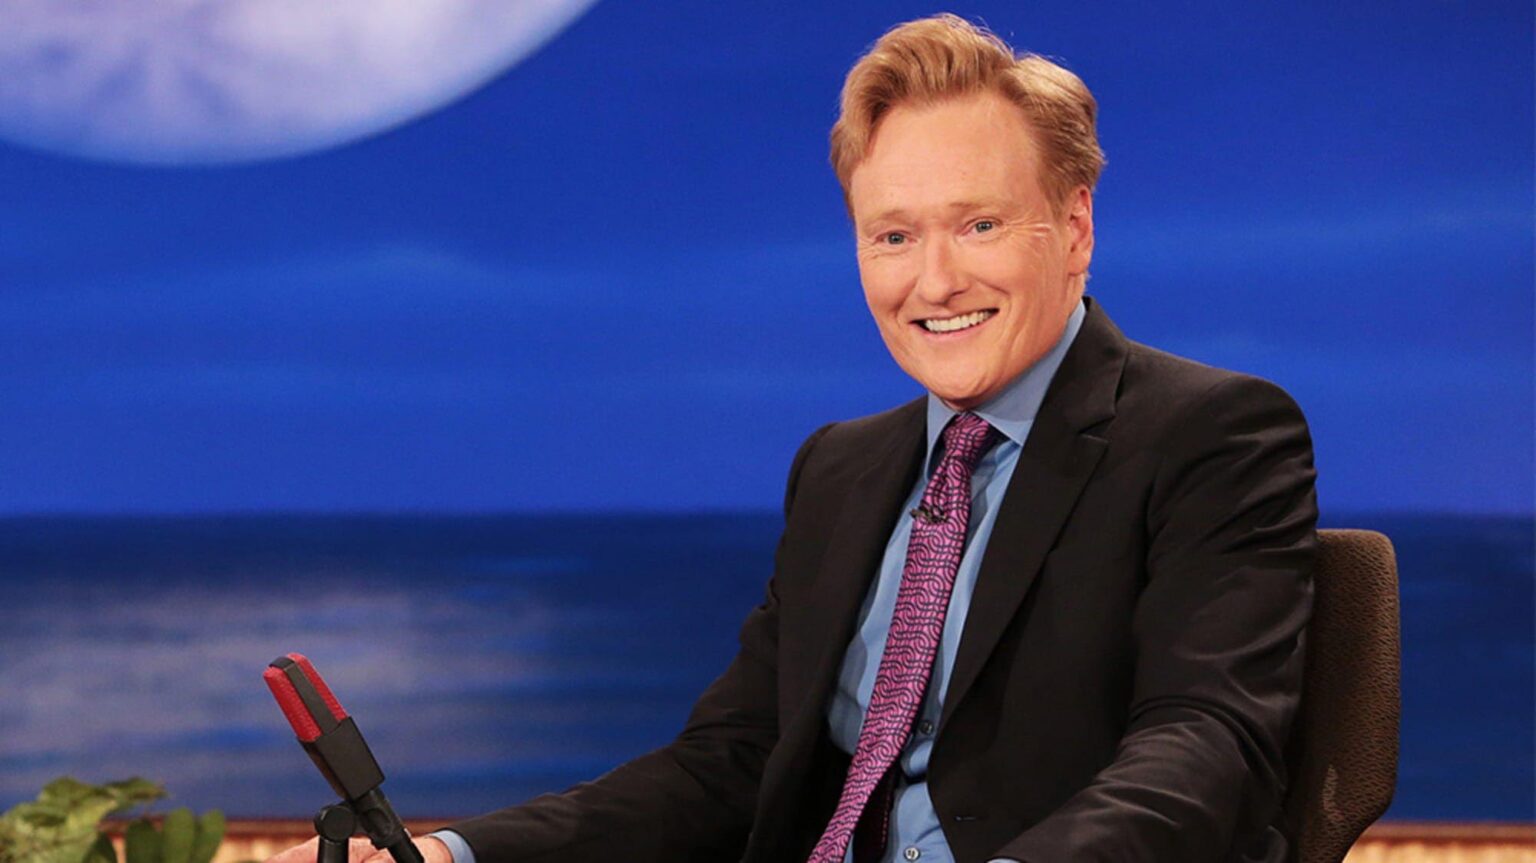 Conan O'Brien is saying farewell to his TBS late night show. Let's look at how it built his net worth and what the future holds for him.